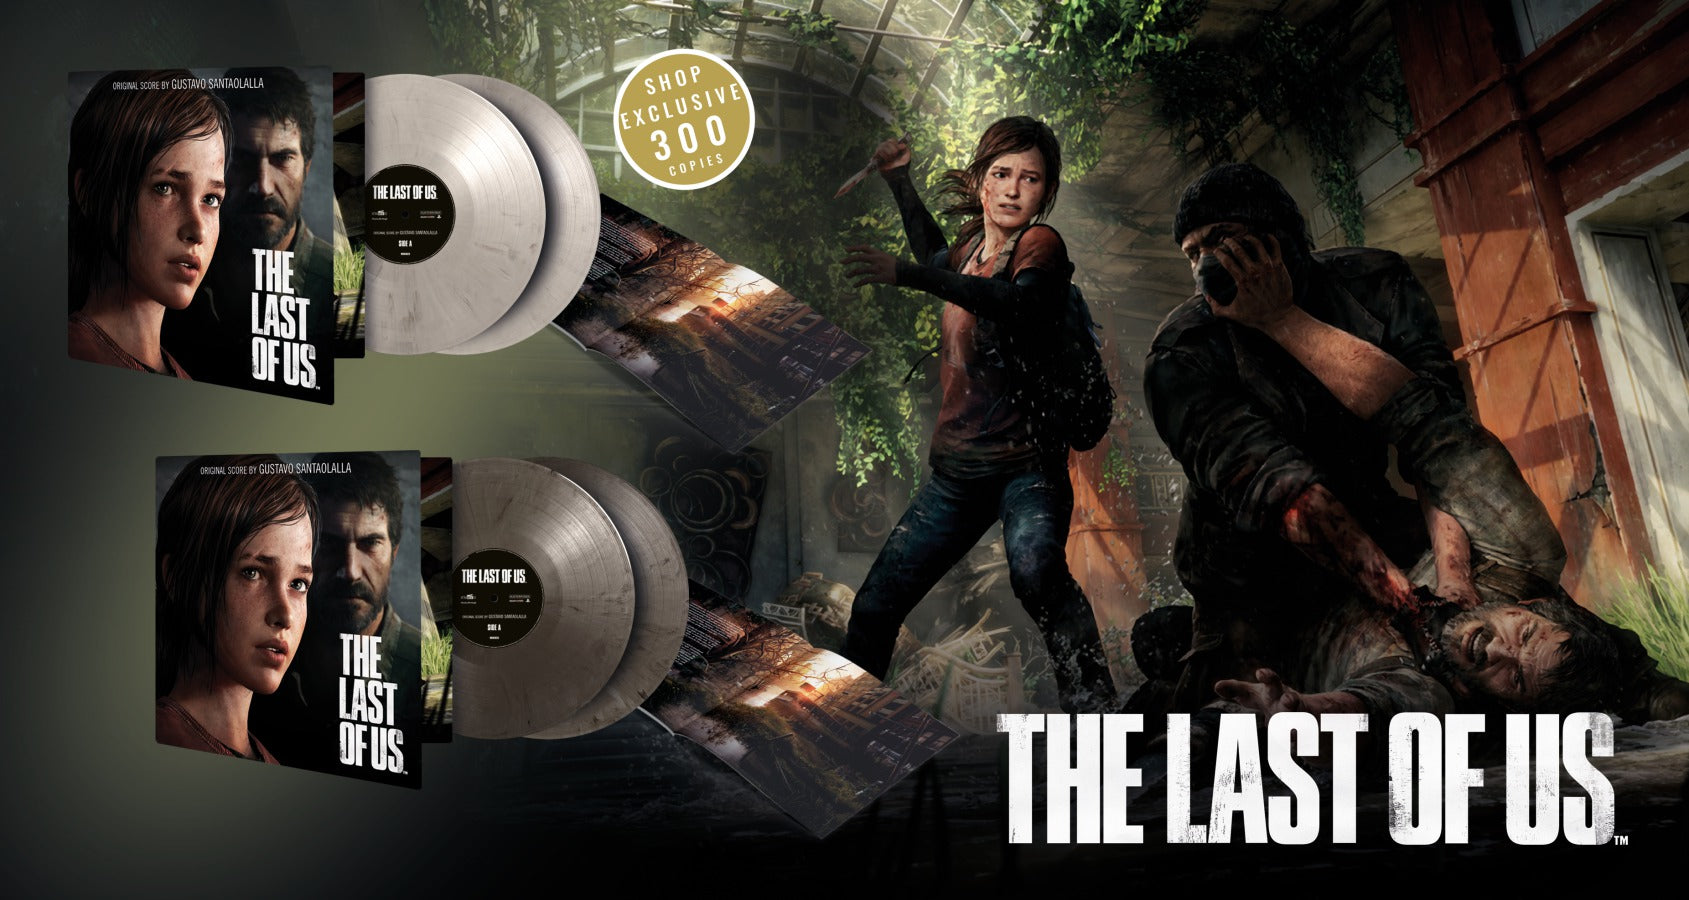 The Last Of Us (ATM Shop Exclusive)  At the Movies Shop – At The Movies  Shop